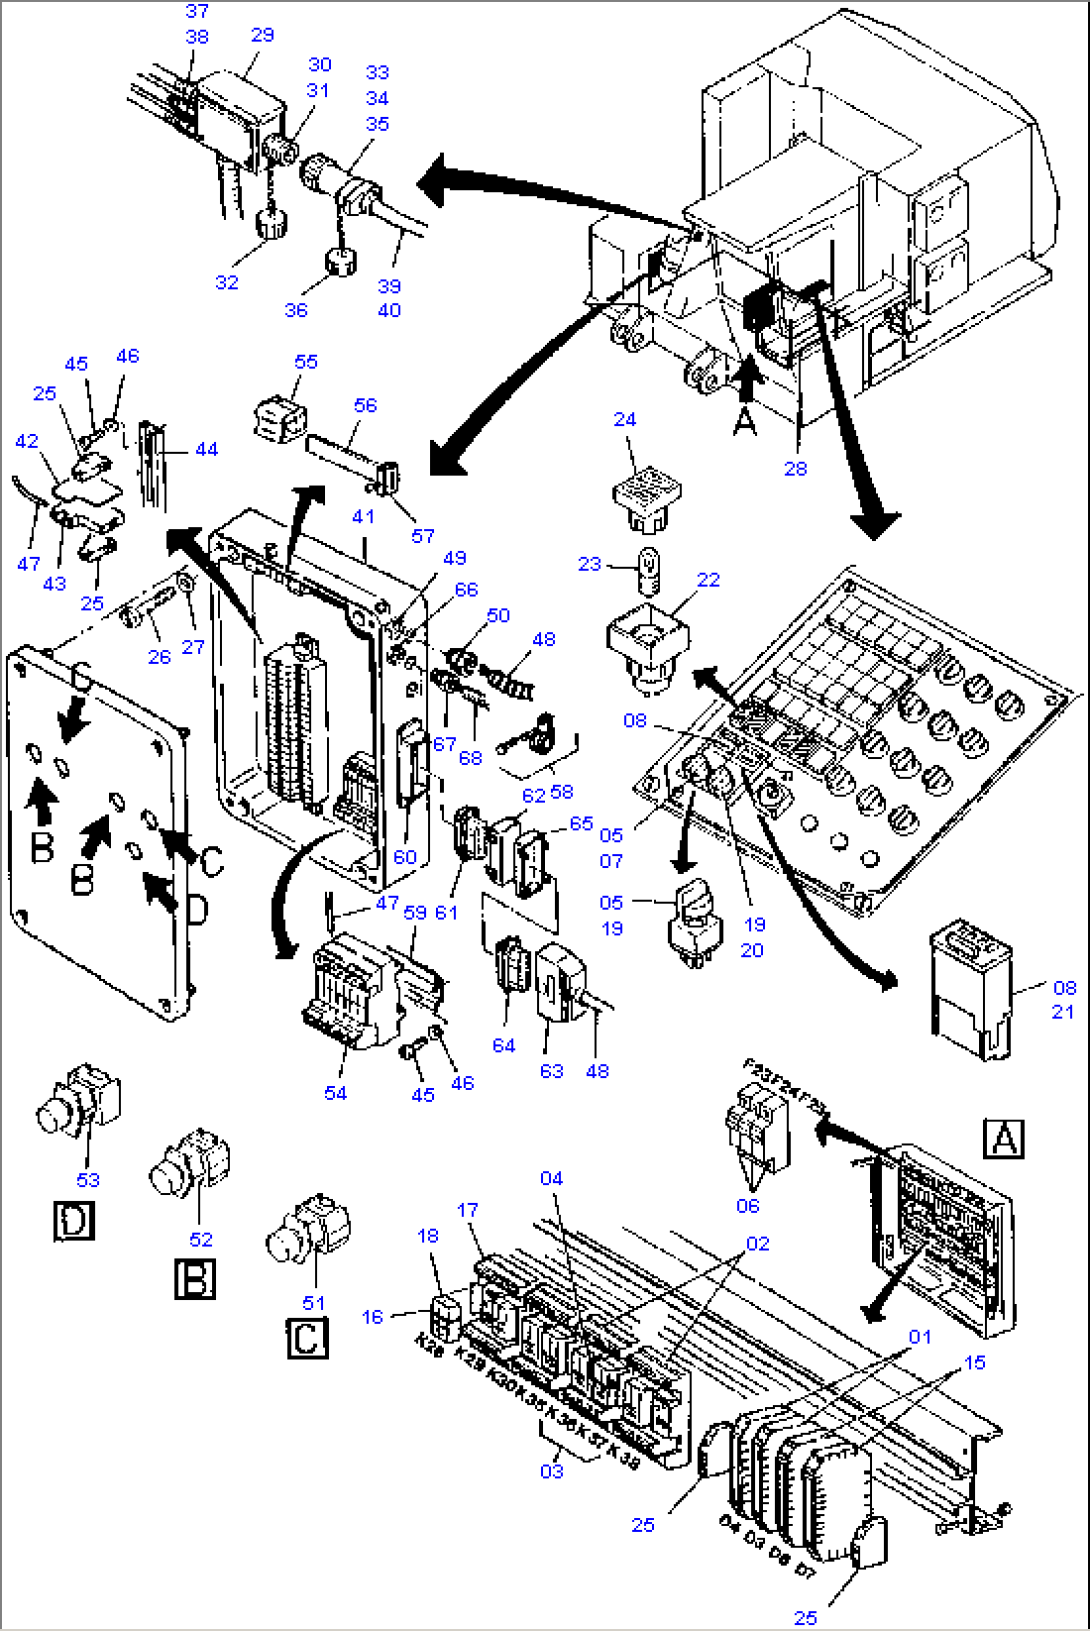 Electrical Equipment, Lube- and Spray-Arrangement